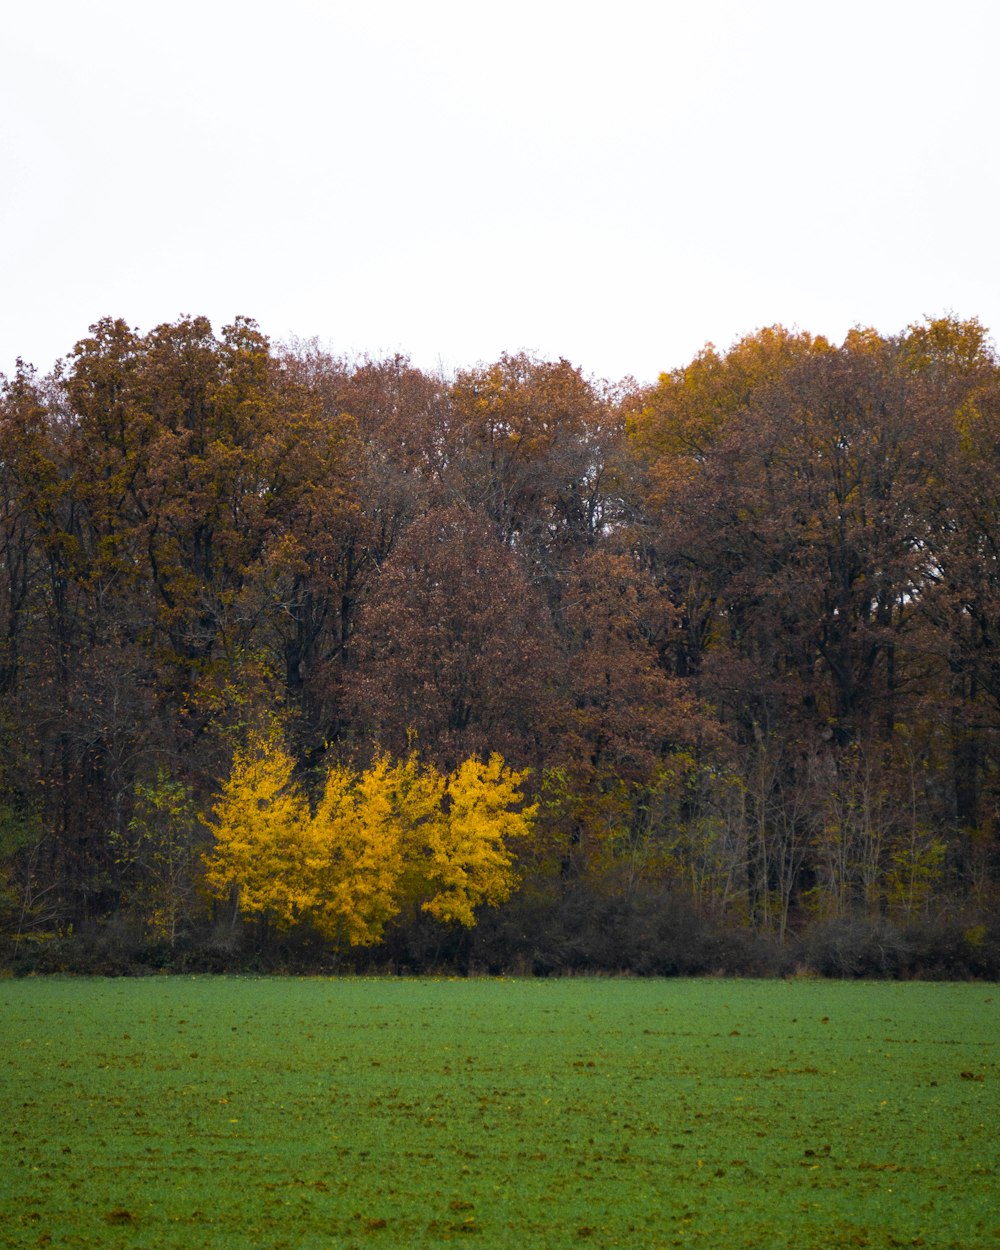 a lone tree in a green field with trees in the background